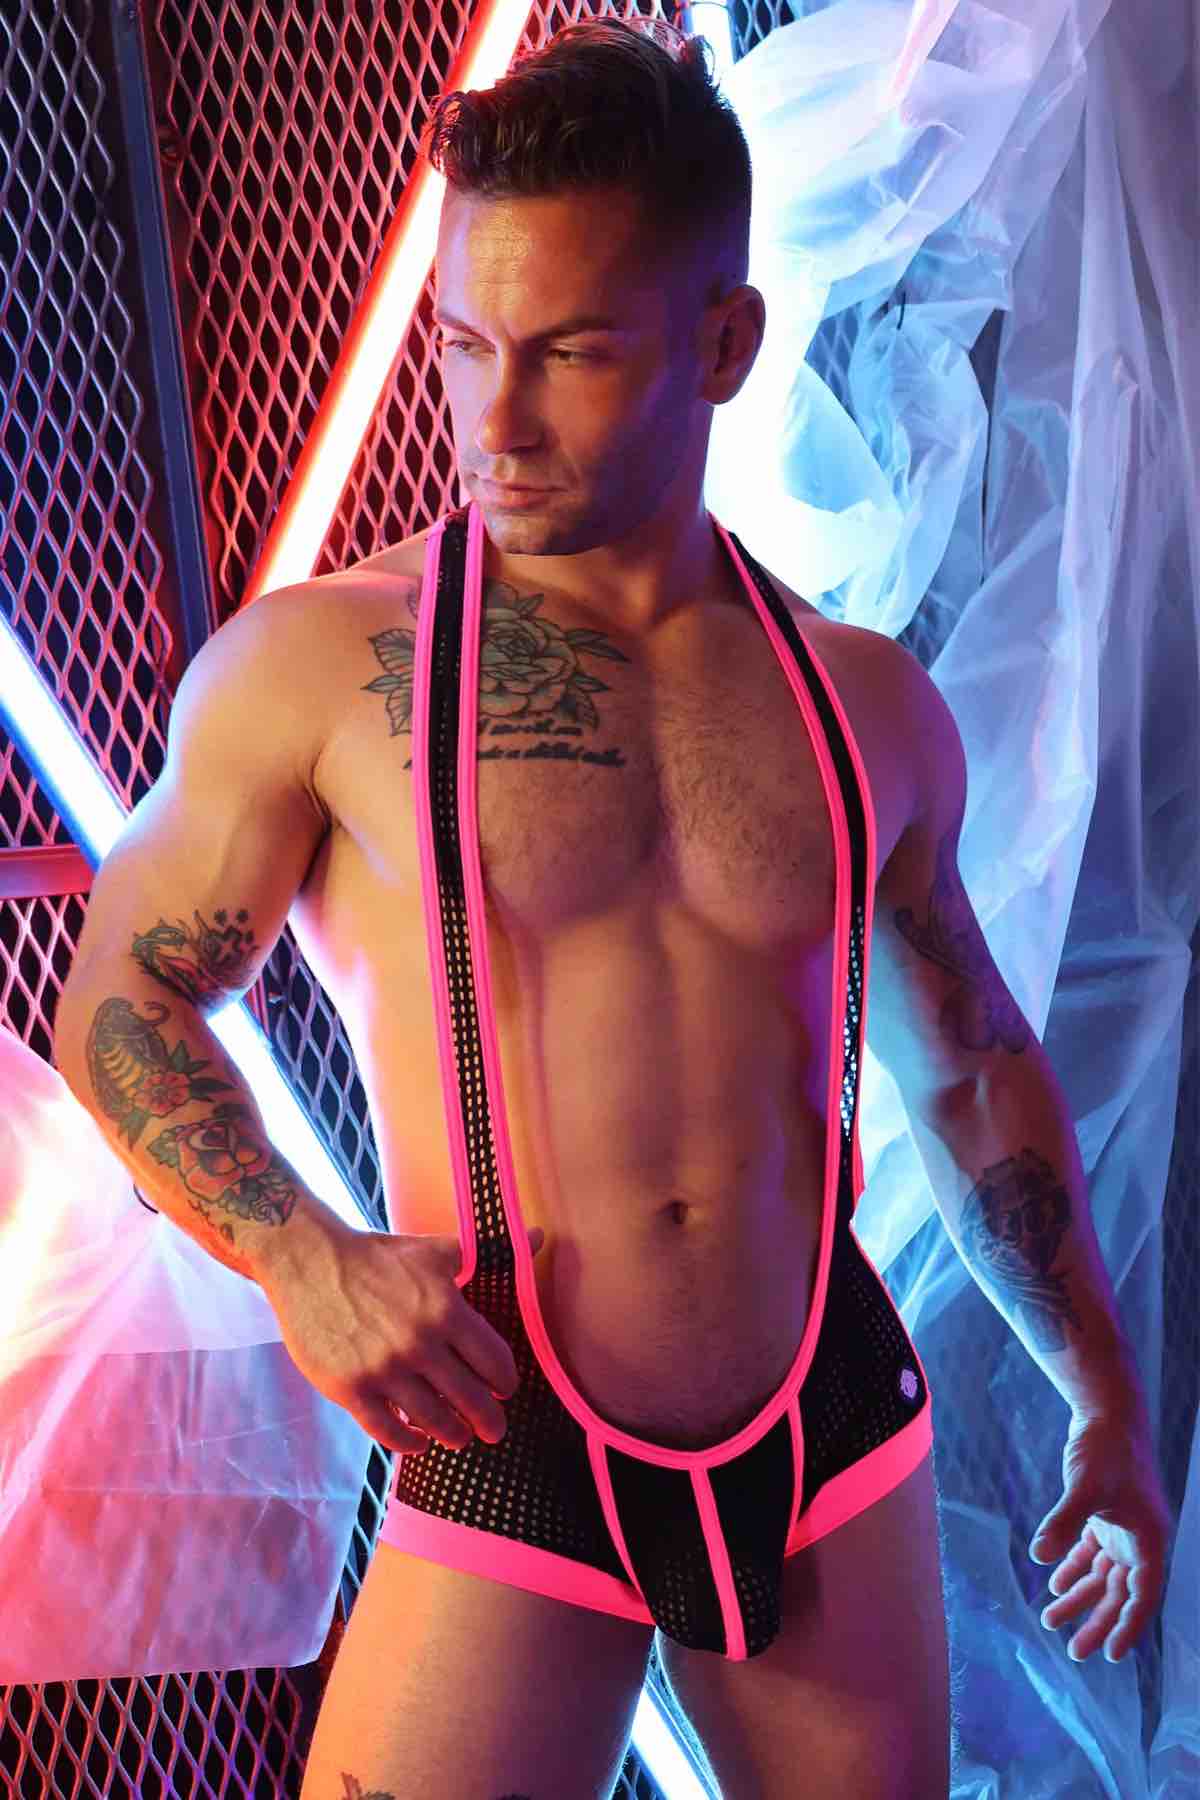 A model wearing the pink and black Dirty Boy Neon Trim Singlet against a fence lit with neon lights, front view.